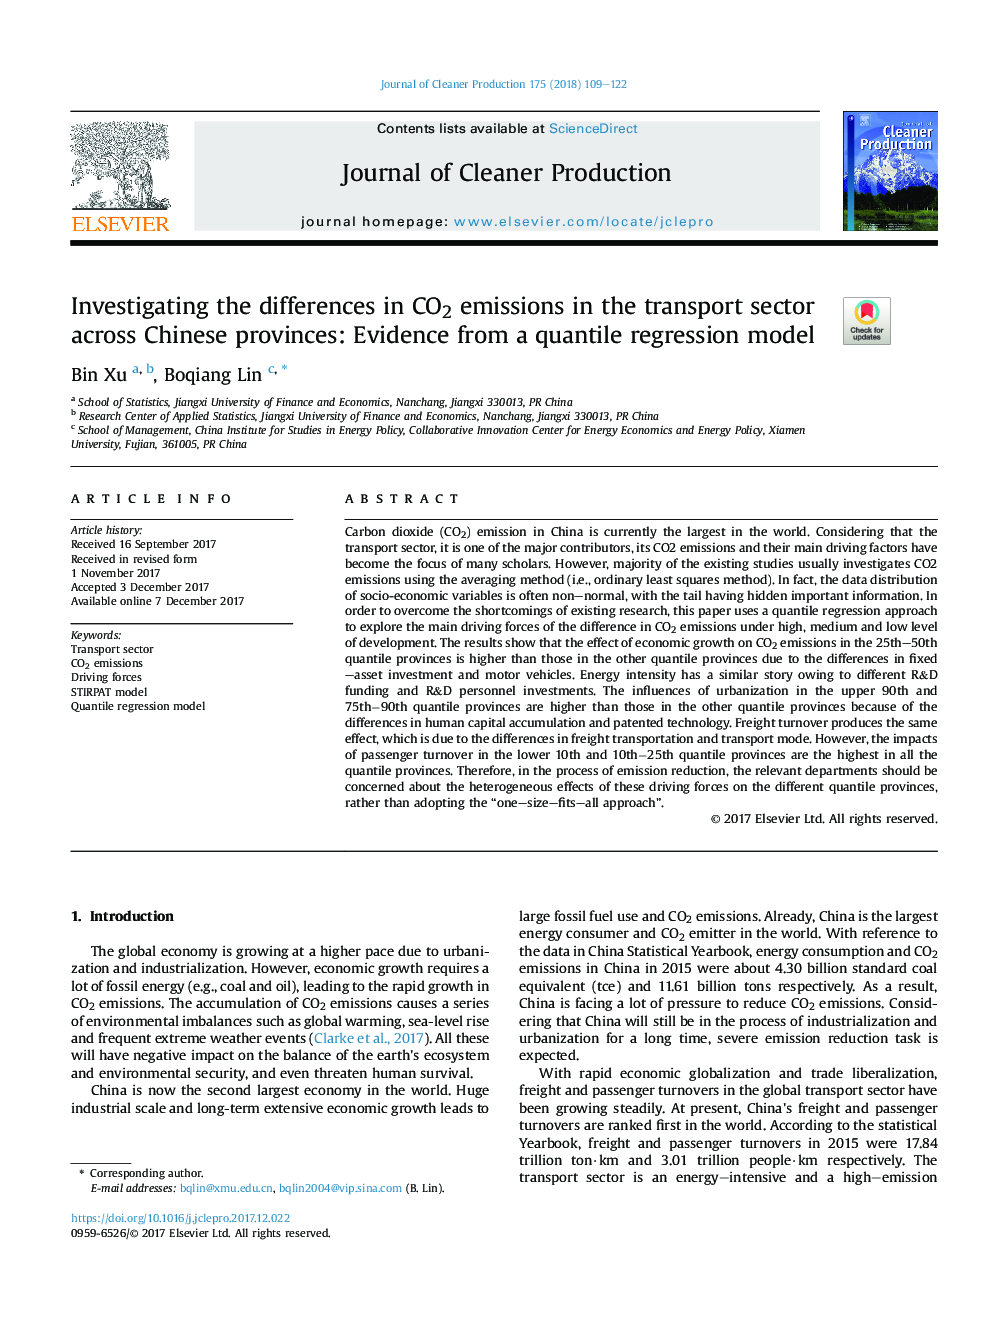 Investigating the differences in CO2 emissions in the transport sector across Chinese provinces: Evidence from a quantile regression model